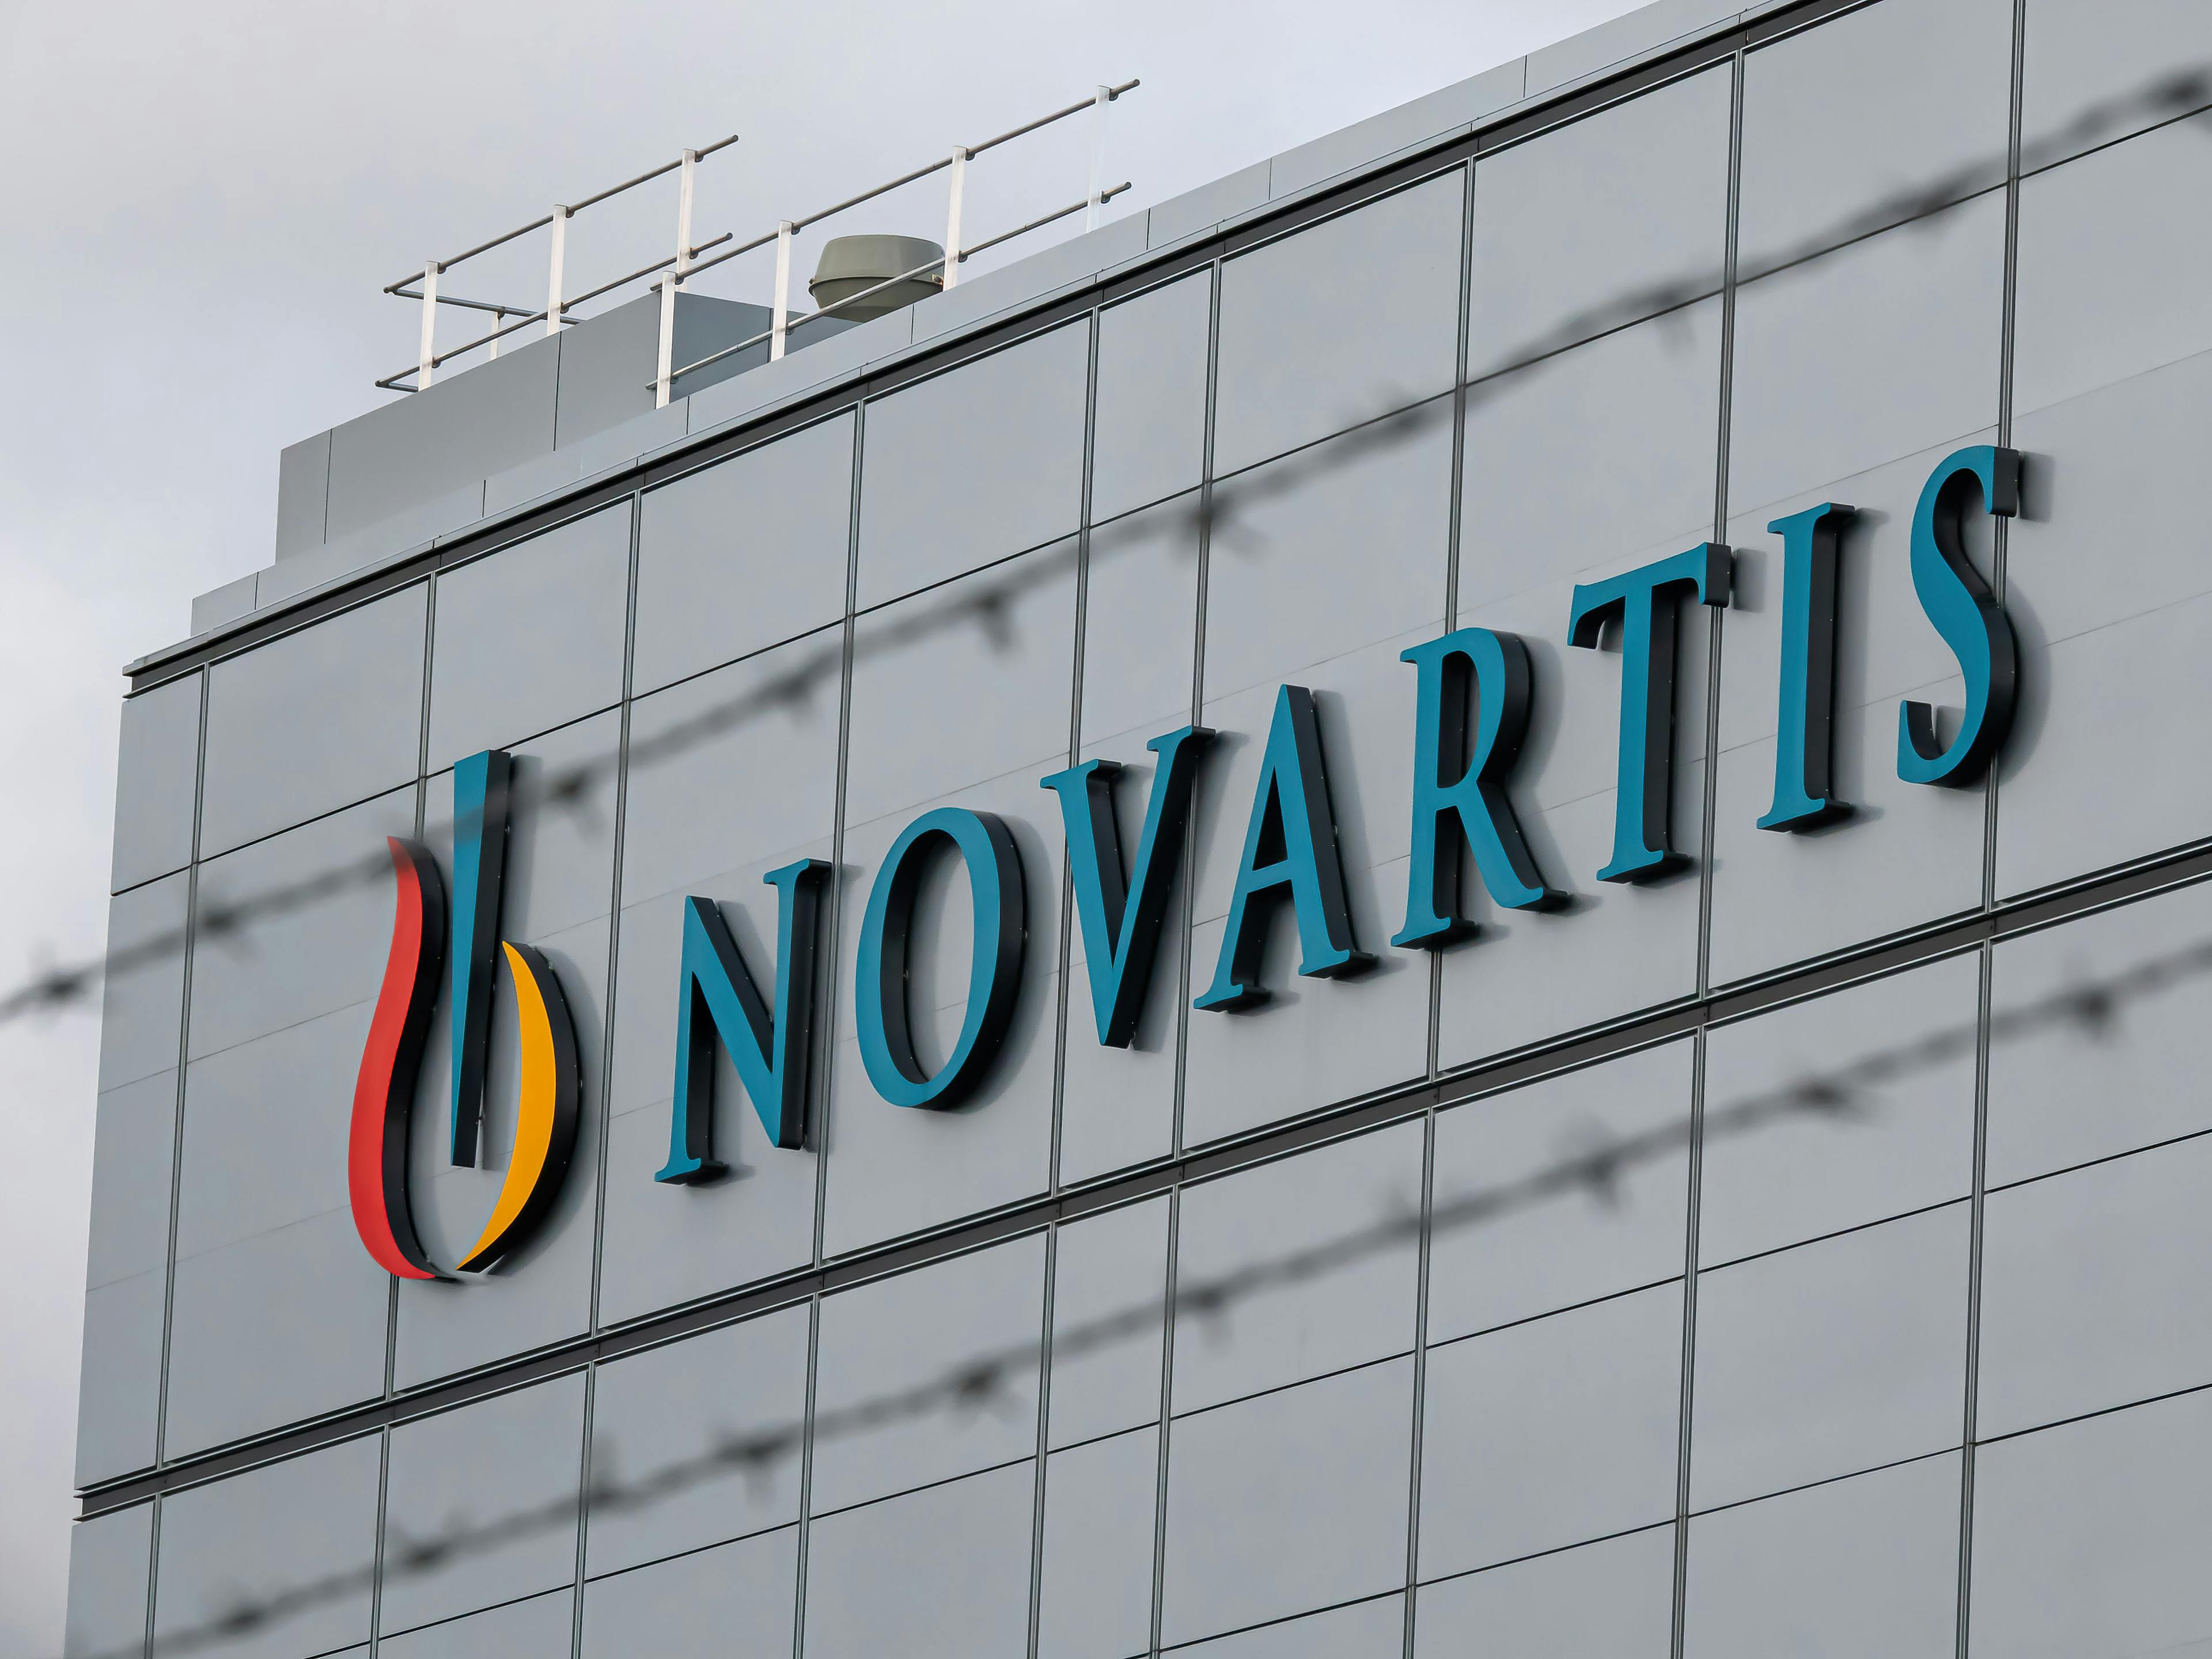 Allarity Loses Rights to Cancer Drug Dovitinib After Missing Payments to Novartis